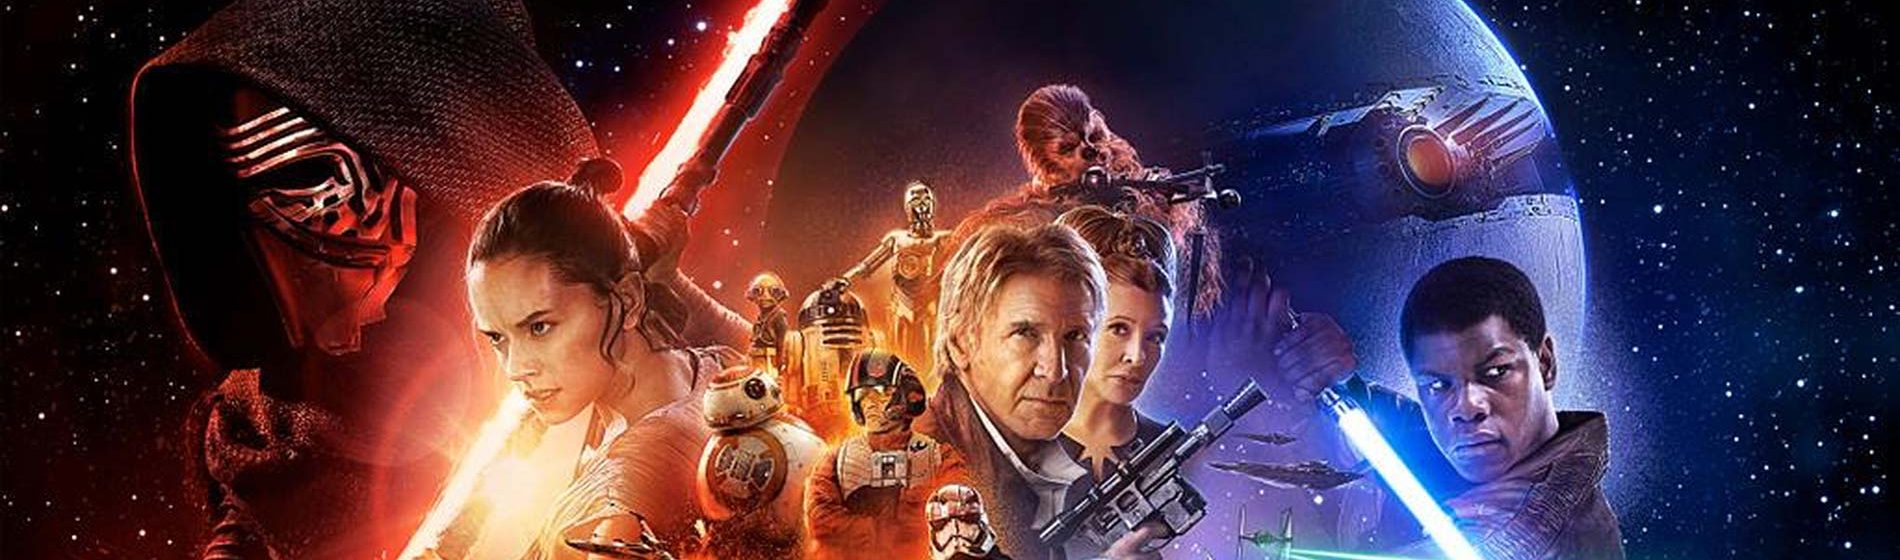 Star Wars The Force Awakens New Poster